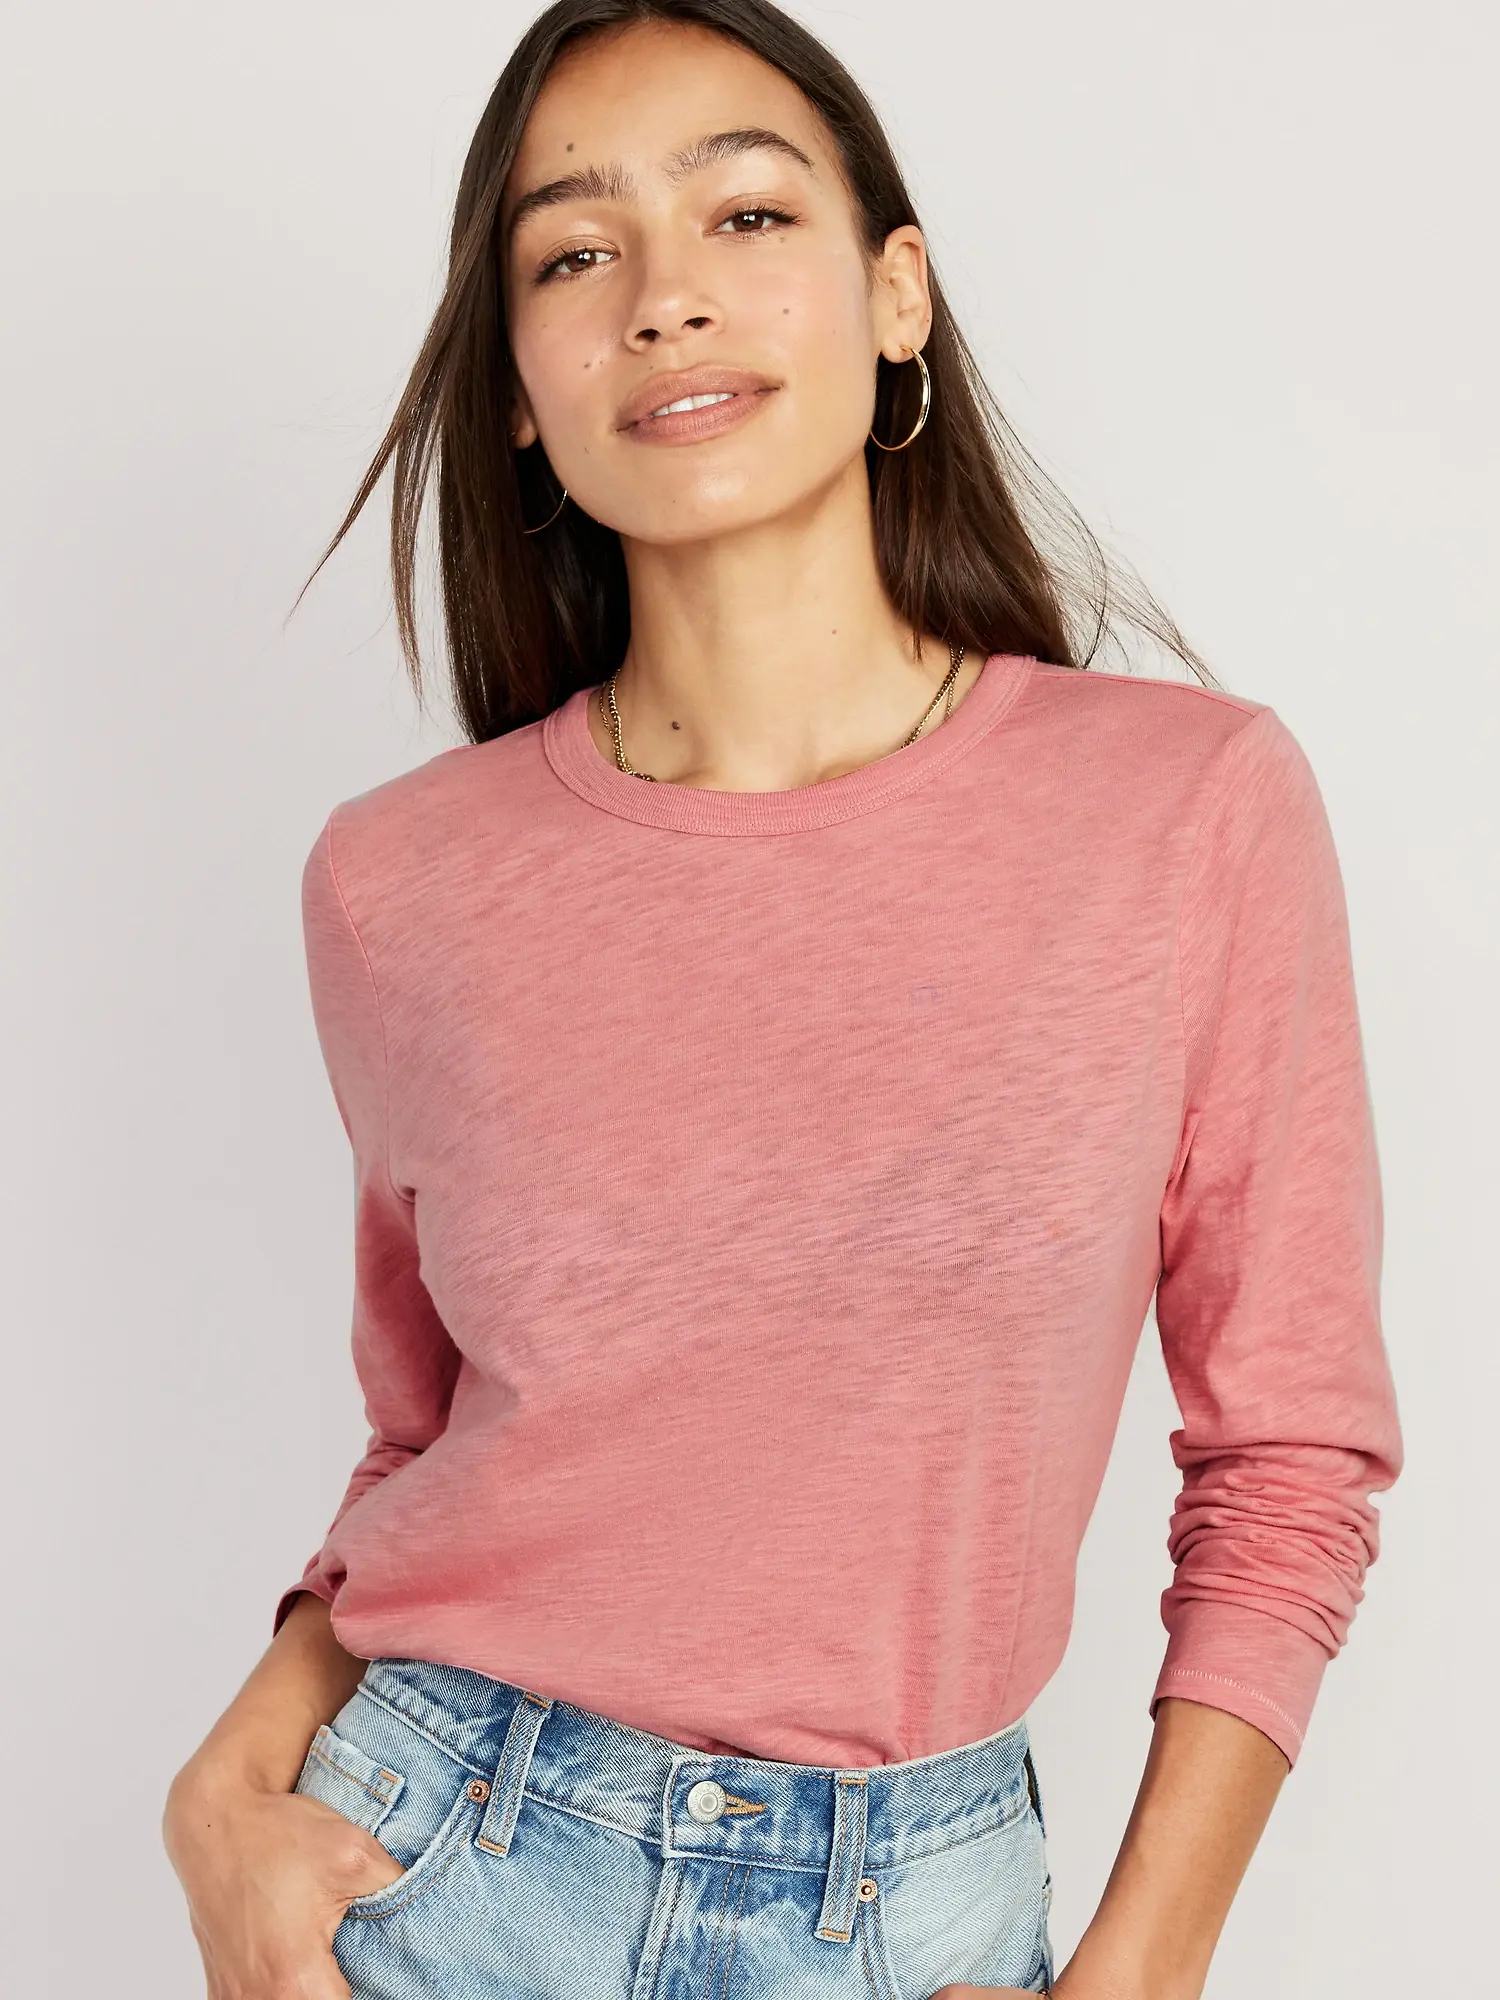 Old Navy EveryWear Long-Sleeve T-Shirt for Women pink. 1